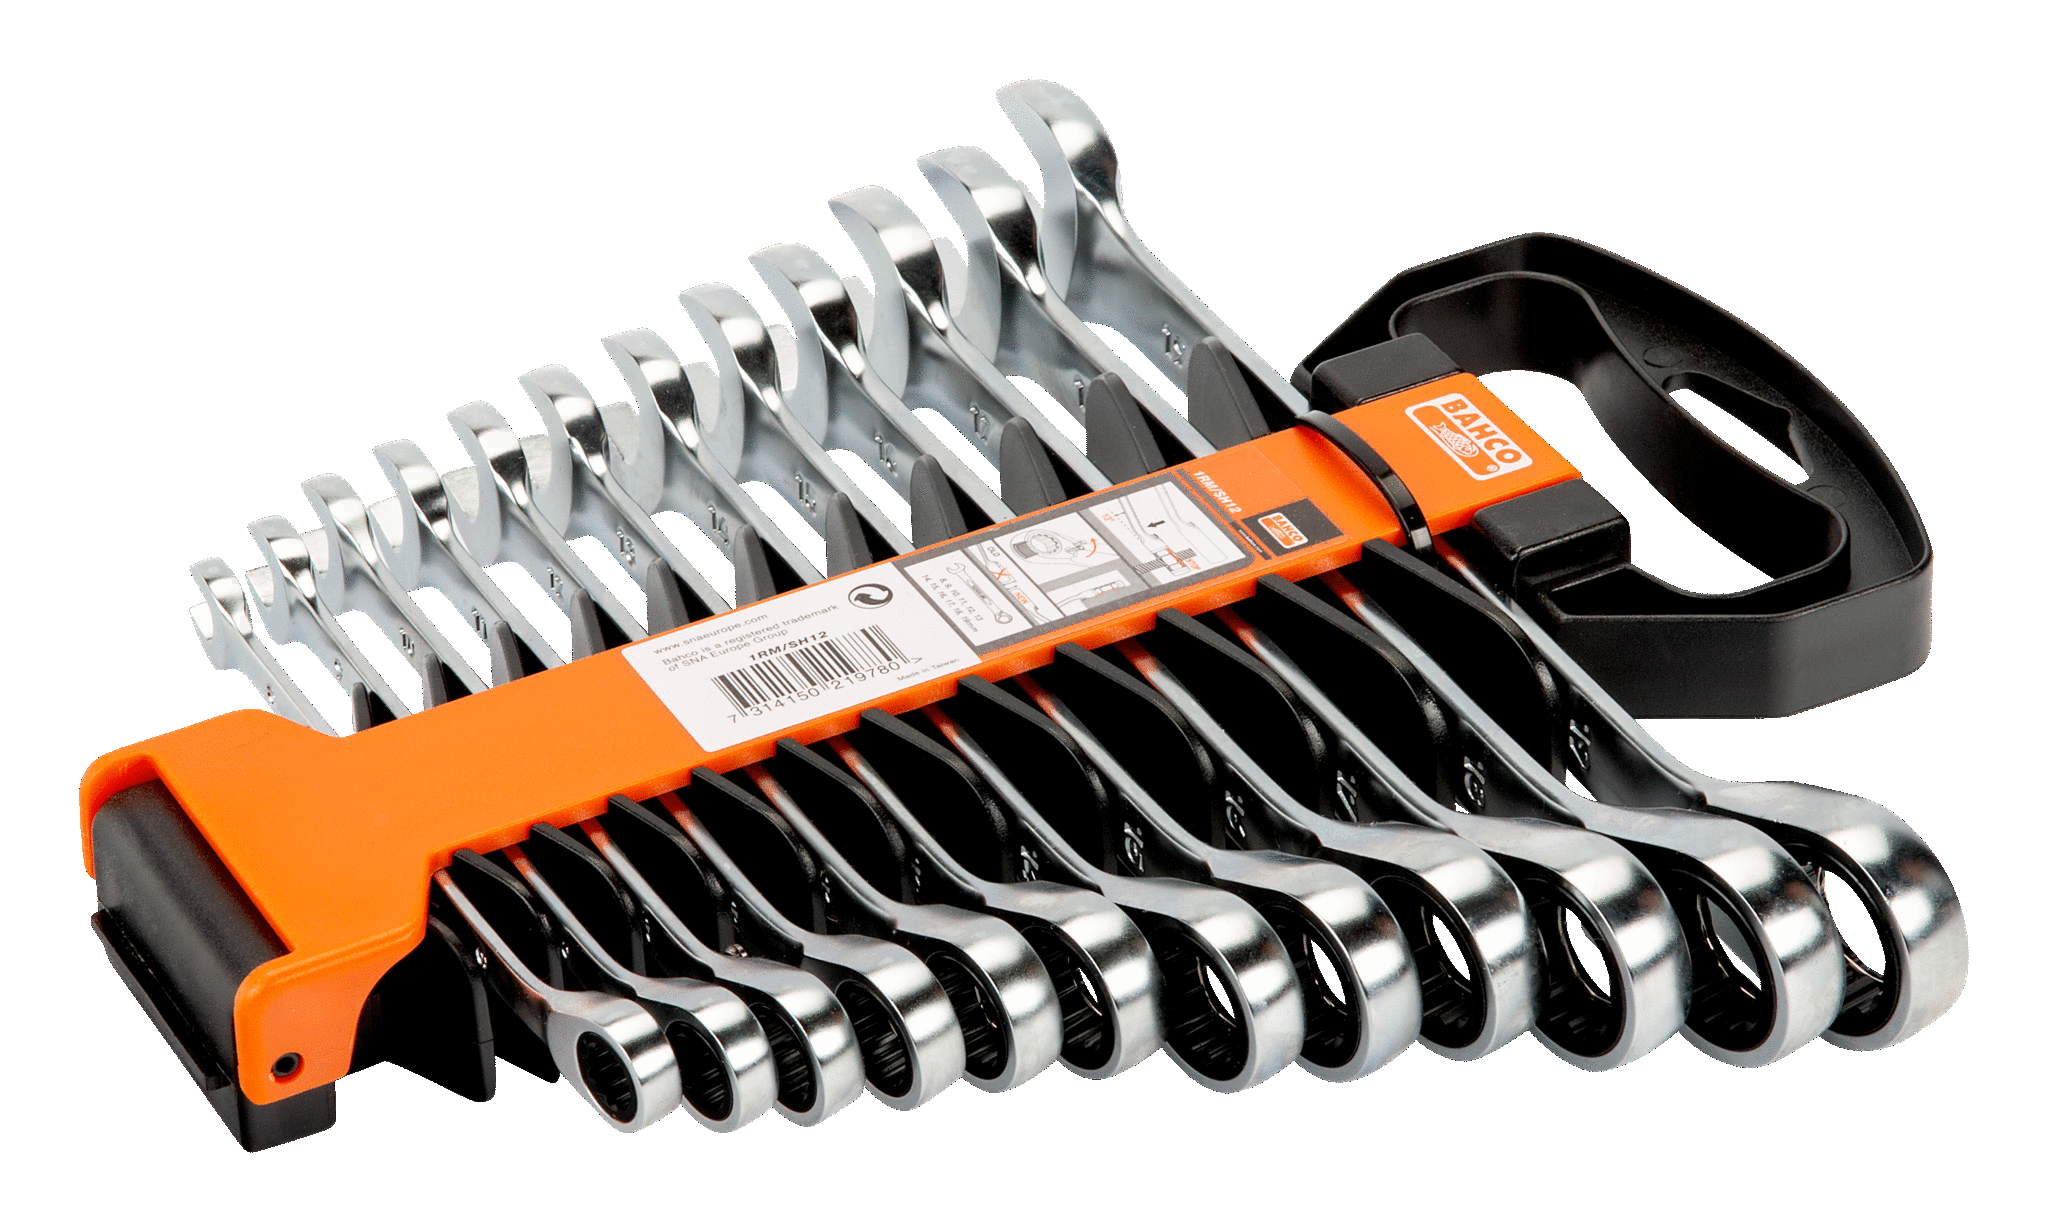 Metric Combination Ratcheting Wrench Set, 12 Pcs/Plastic Holder - 1RM/SH12 by Bahco